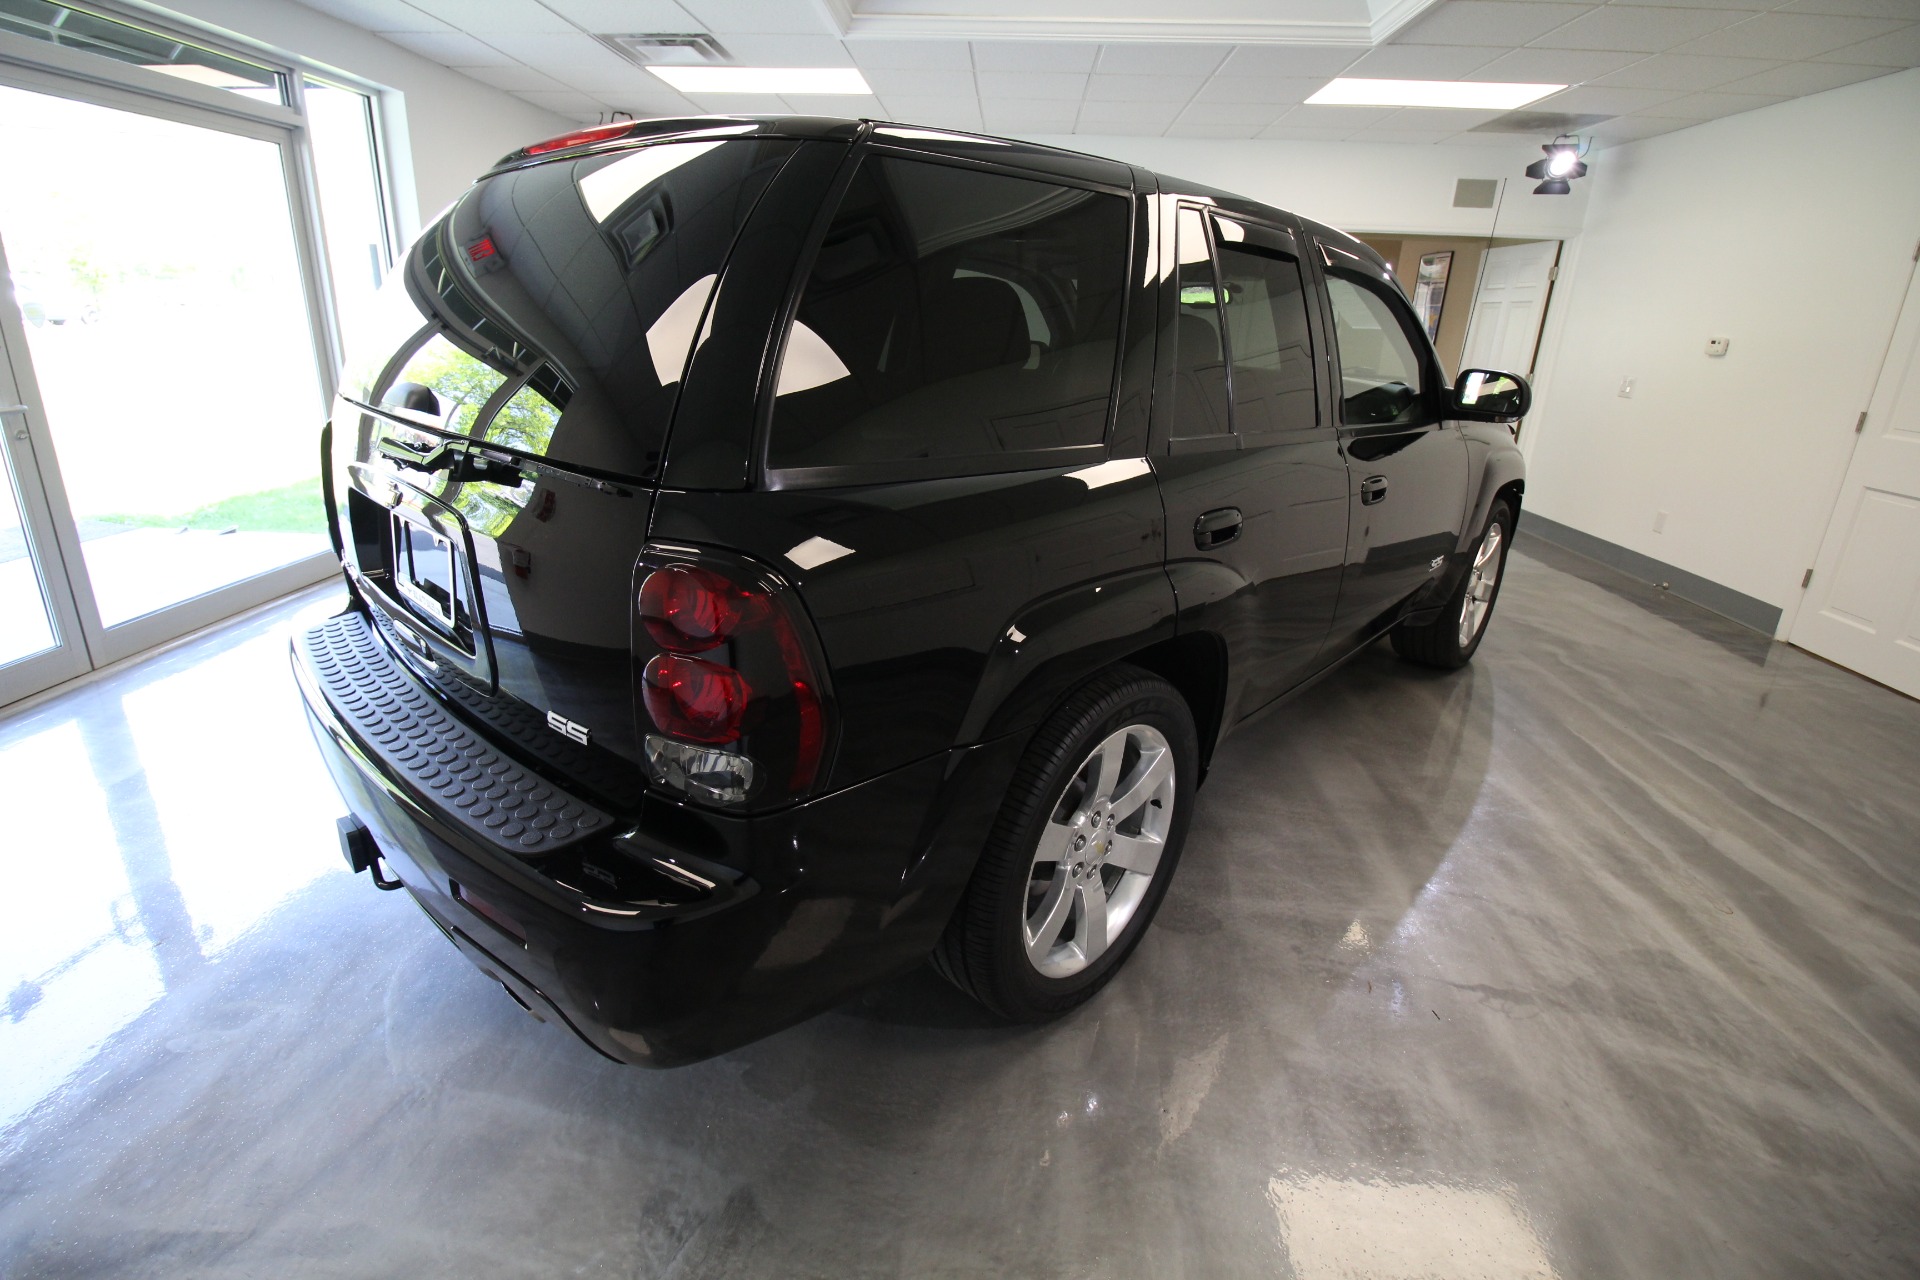 Used 2006 Chevrolet TrailBlazer SS LT COLLECTOR''''S QUALITY SUPERB INSIDE AND OUT LOW MILES 56K | Albany, NY